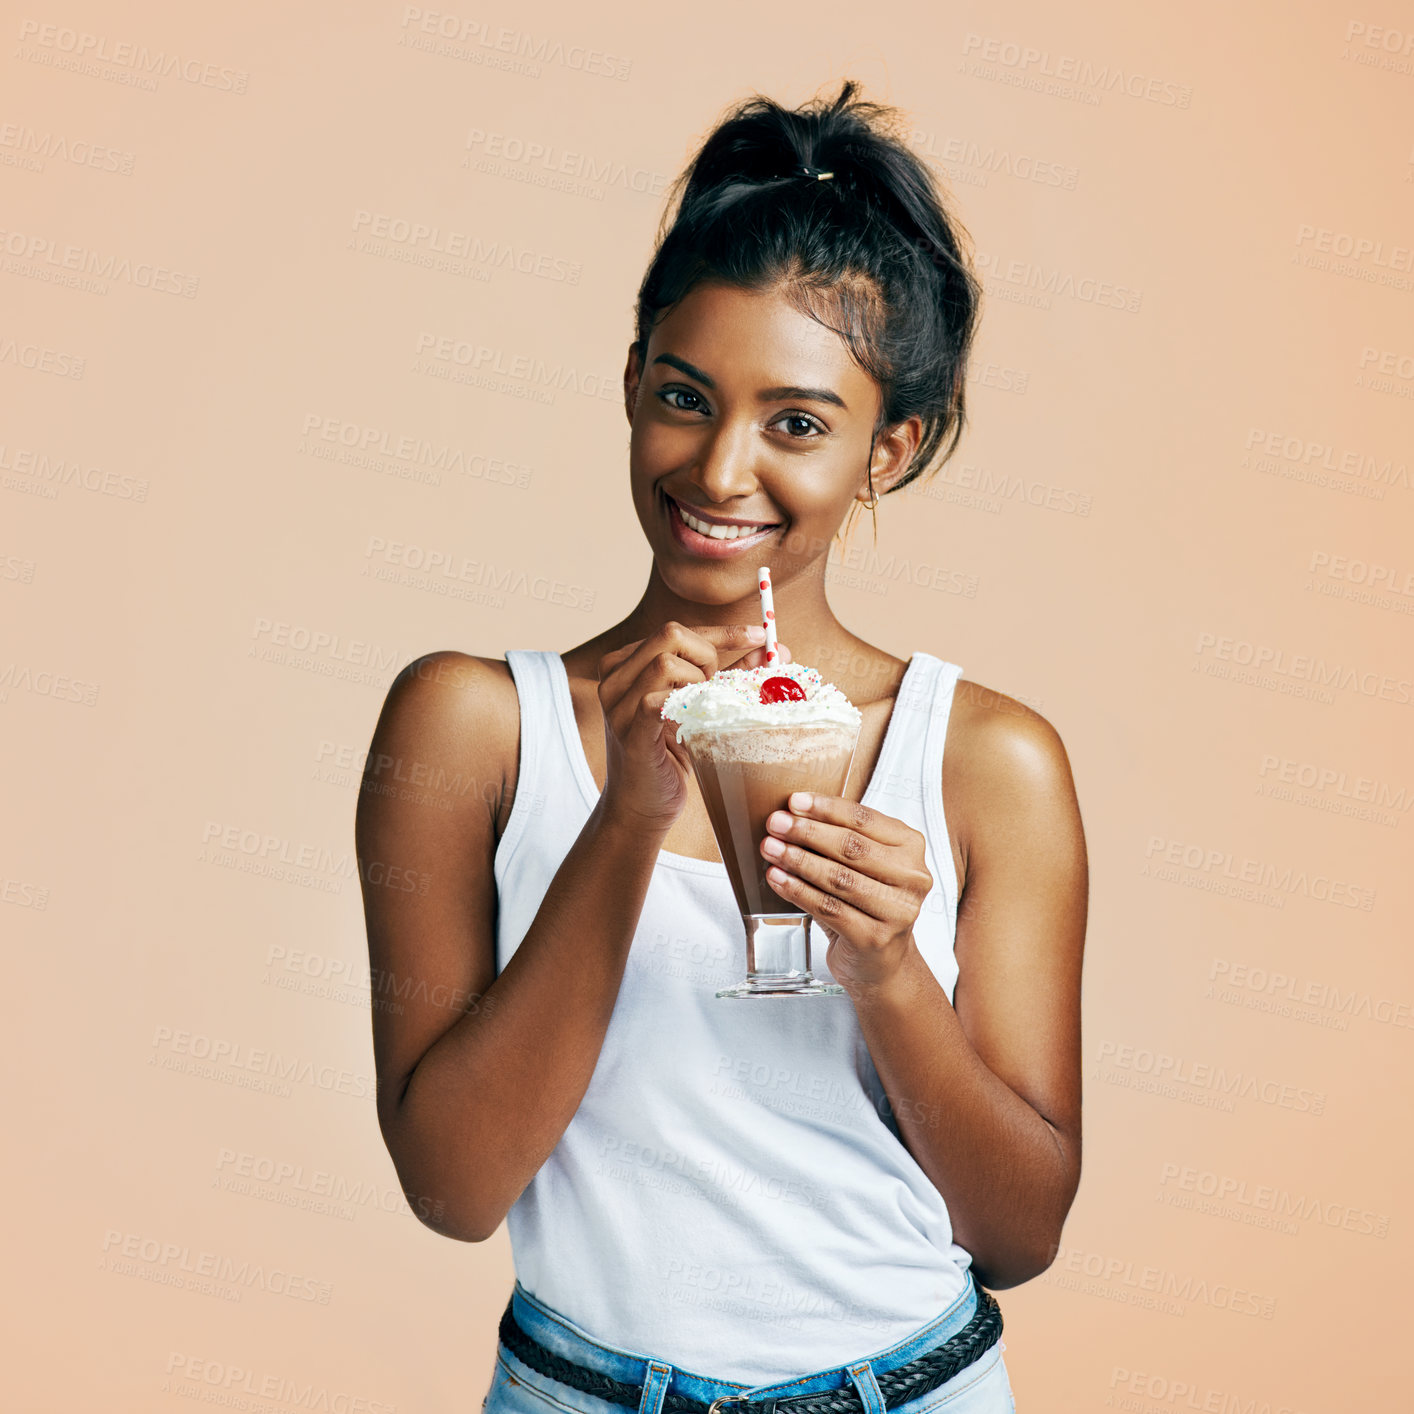 Buy stock photo Studio portrait of a beautiful young woman posing with a chocolate milkshake against an orange background